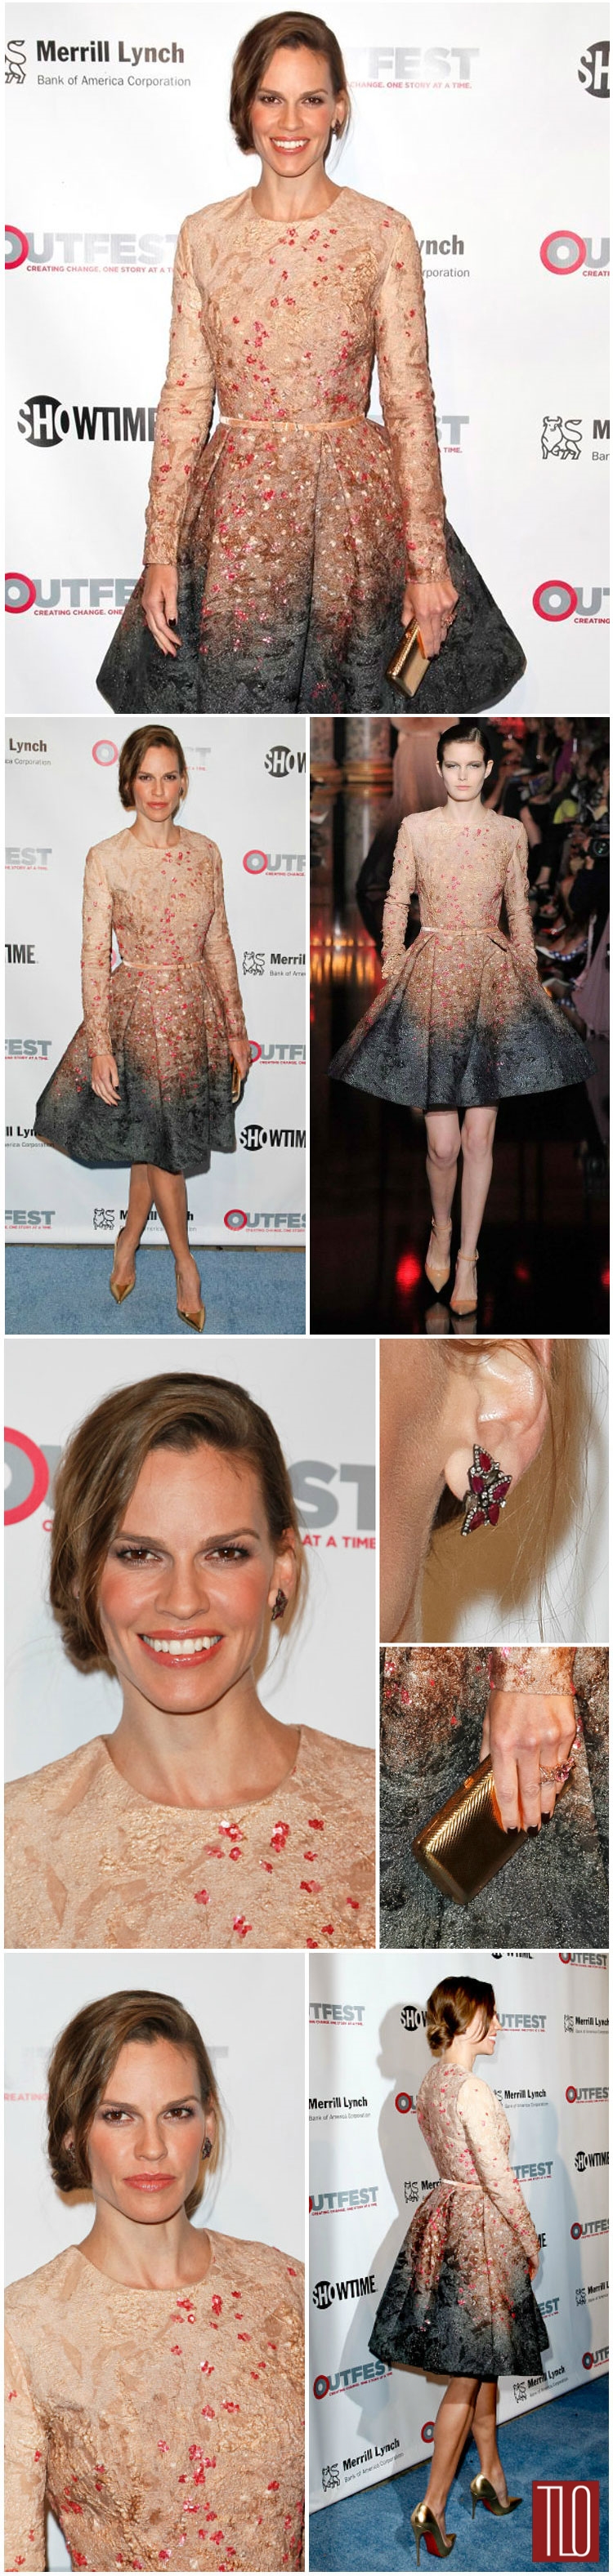 Hilary-Swank-Elie-Saab-Couture-2014-Outfest-Legacy-Awards-Tom-Lorenzo-Site-TLO